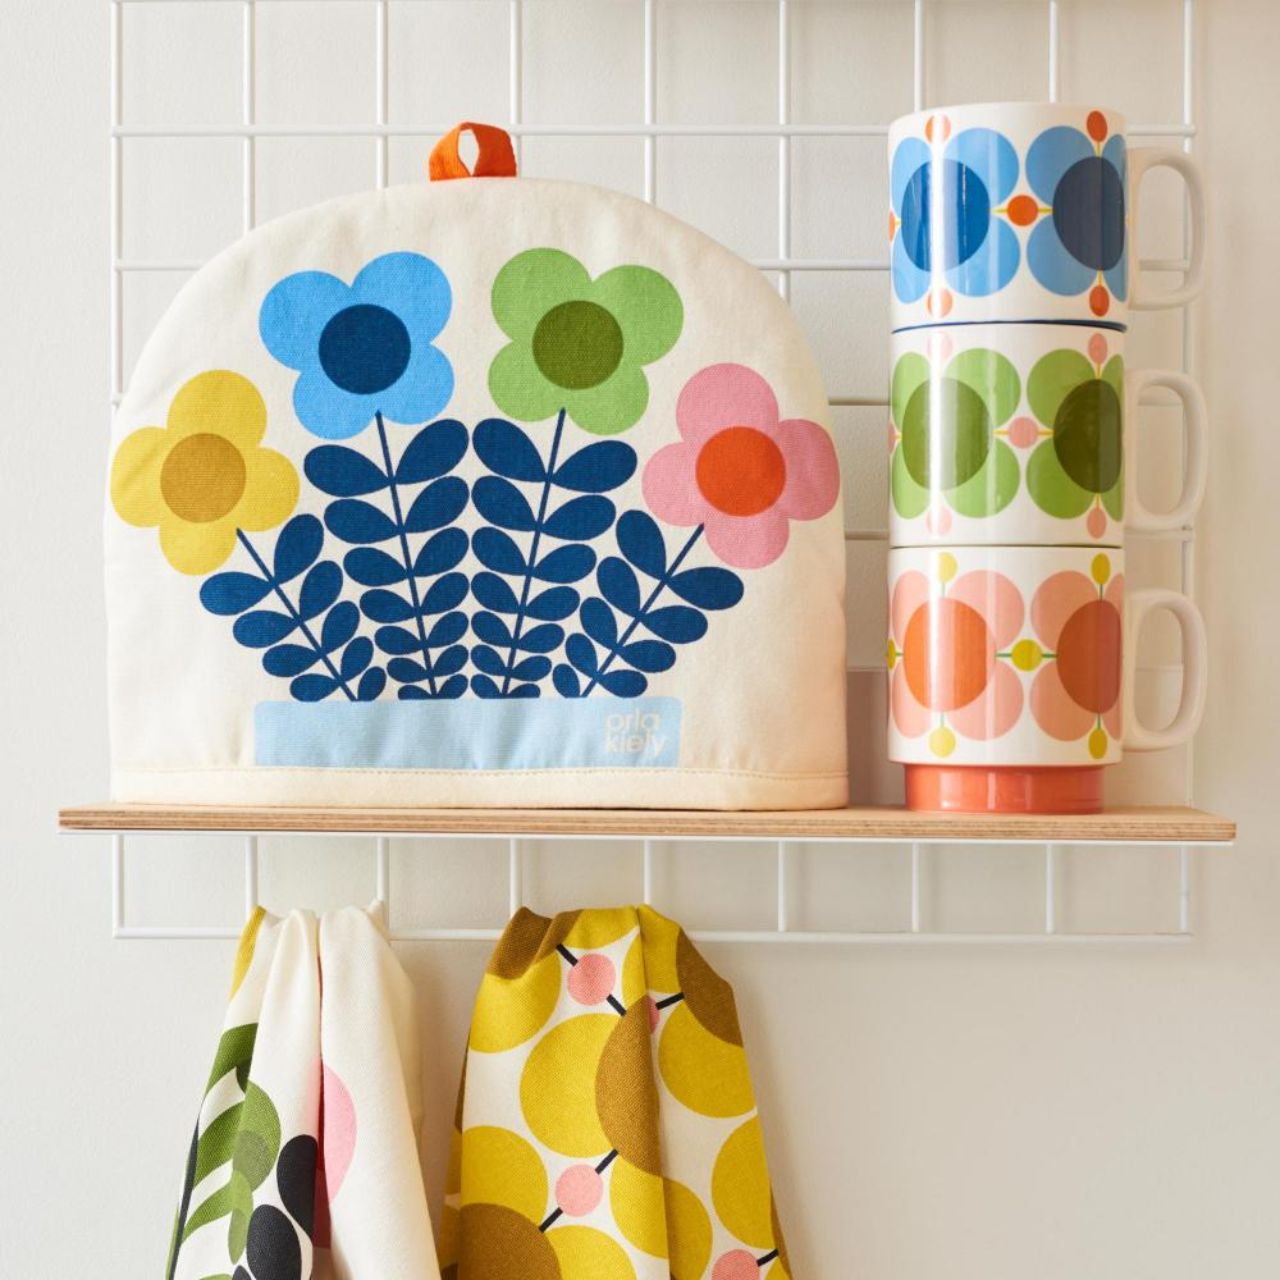 Tipperary Orla Kiely Set 2 Stacking Mugs - Atomic Flower Bubblegum & Basil  DESIGNED IN THE UK BY ORLA KIELY: This set of two mugs has a unique 'Atomic Flower' print and is designed to be stacked.  Each mug is stamped with an authentic Orla Kiely logo.